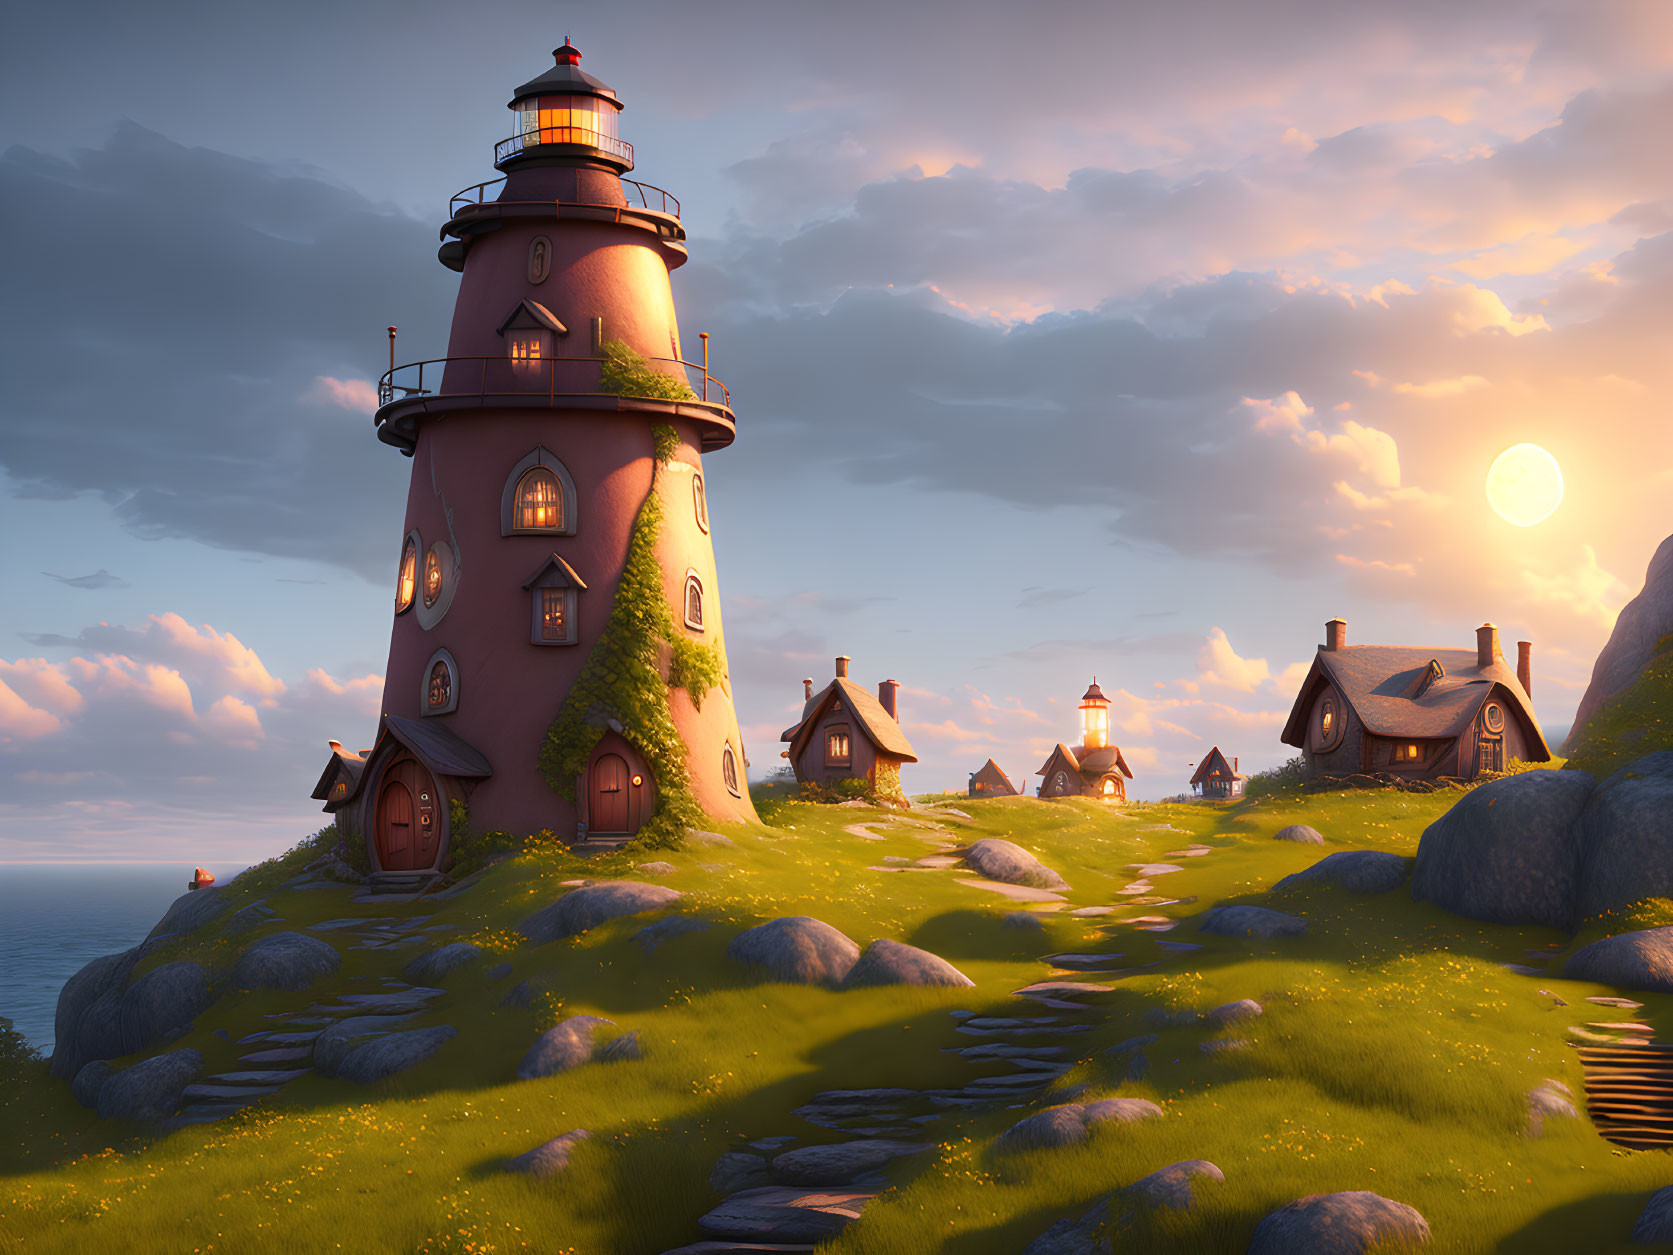 Whimsical lighthouse and cottages in serene sunset scene